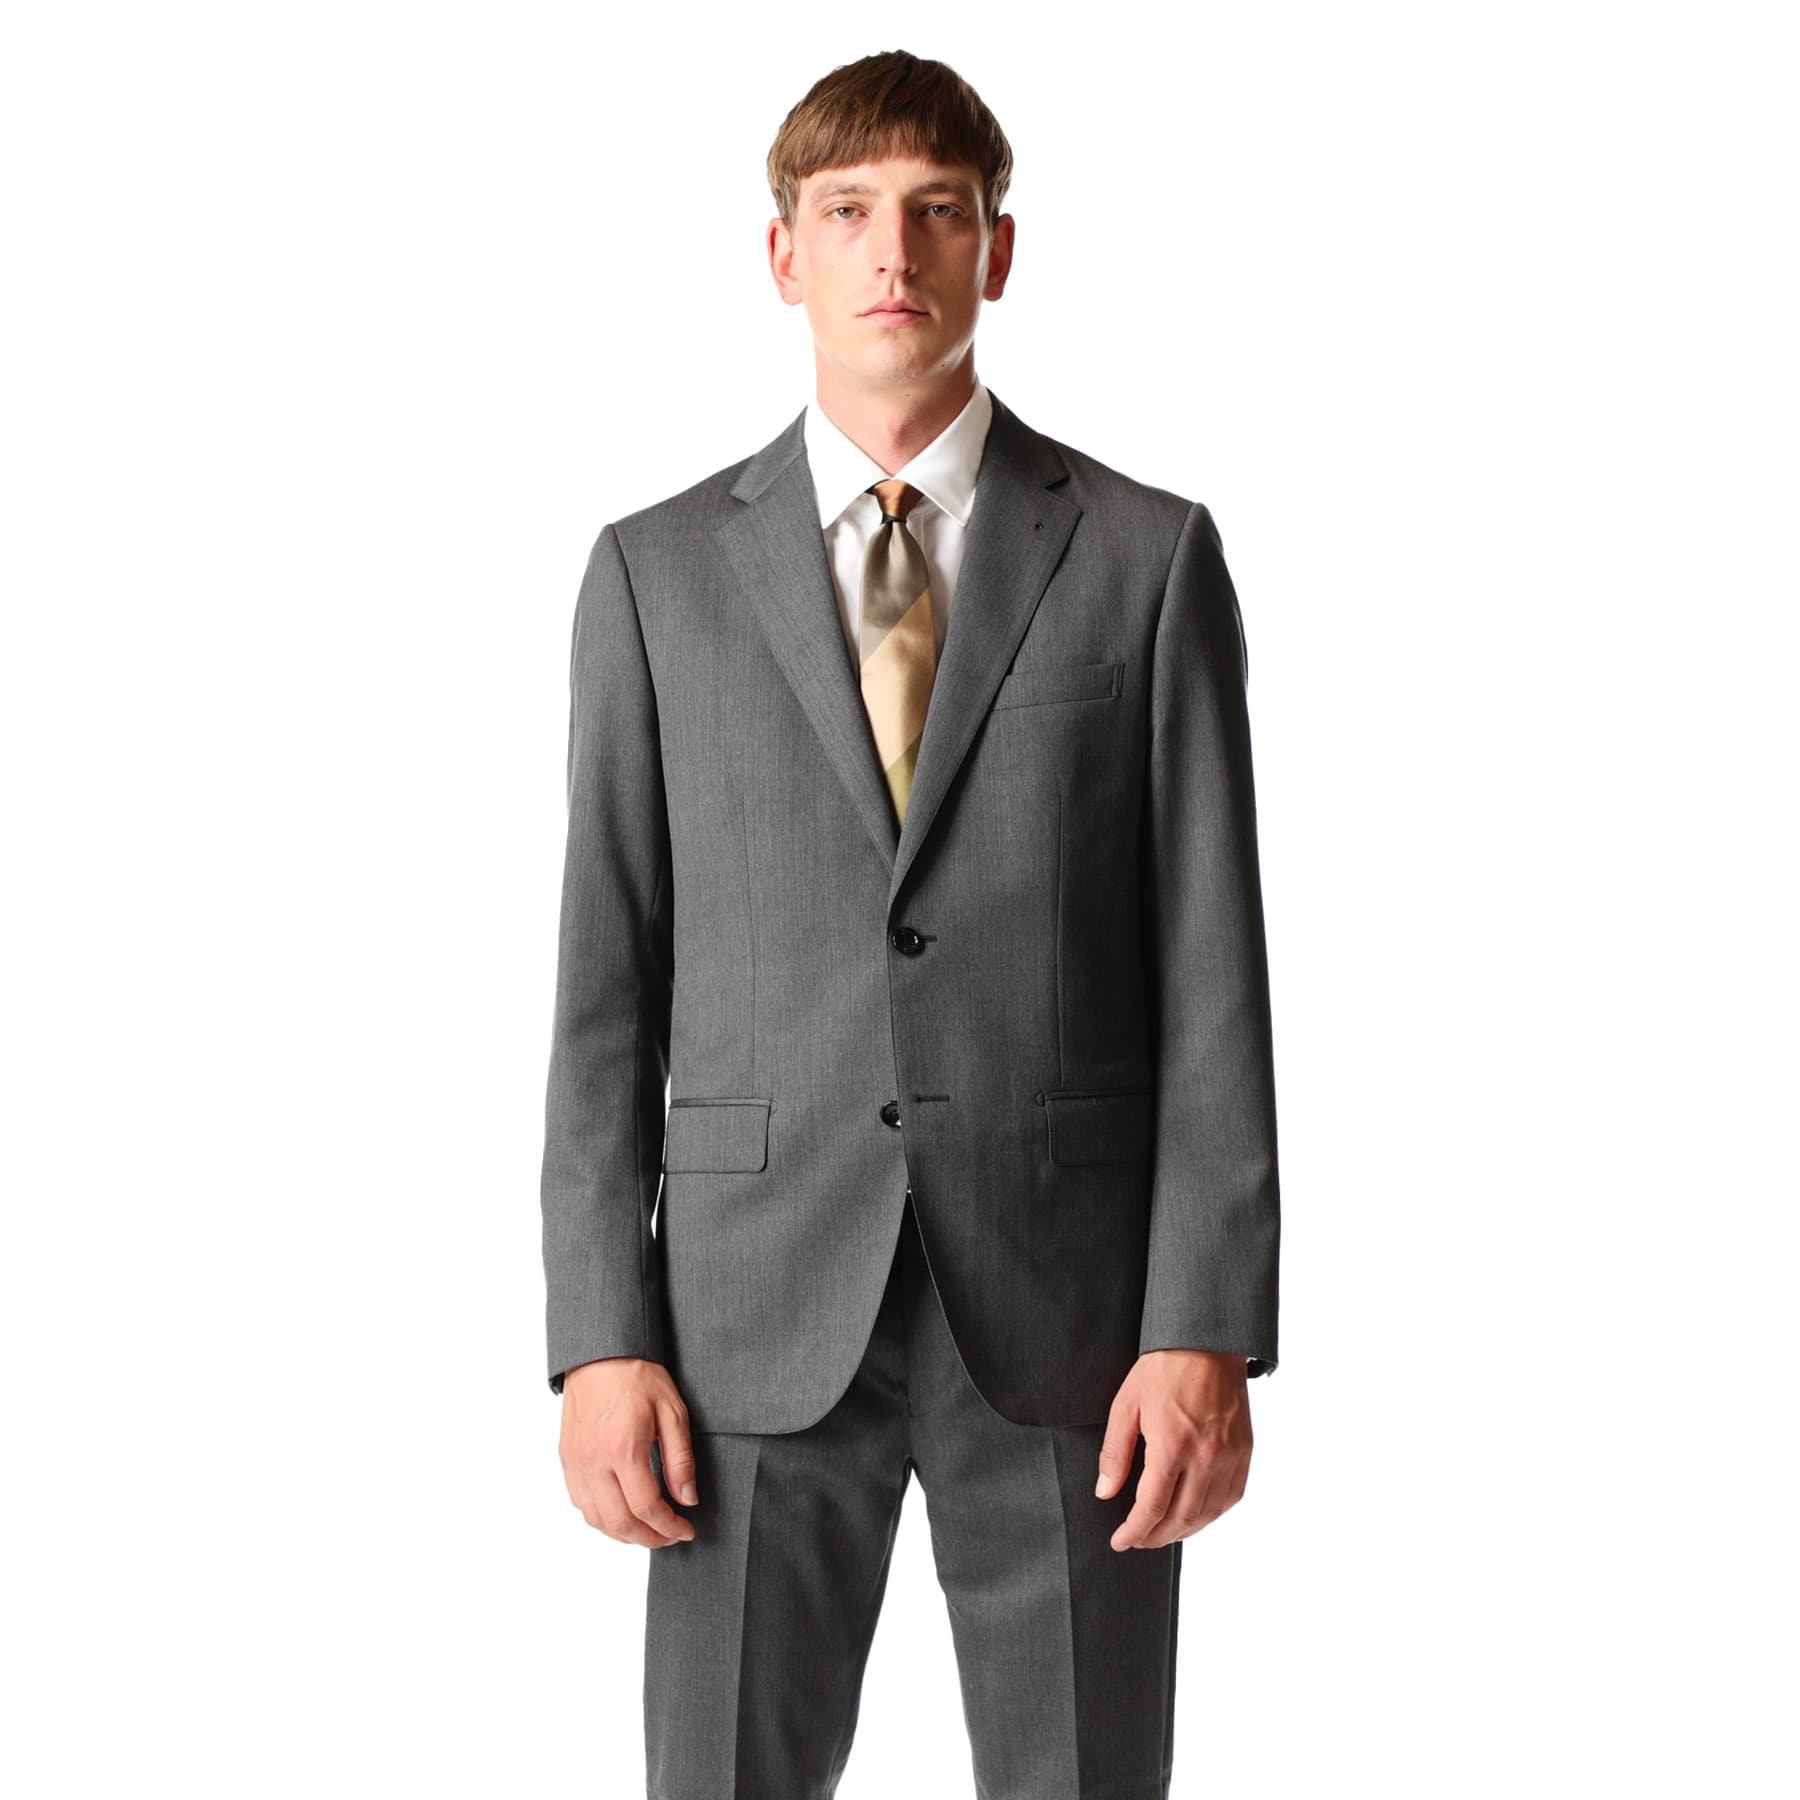 SOPH. | 2B SUITS(S GRAY):